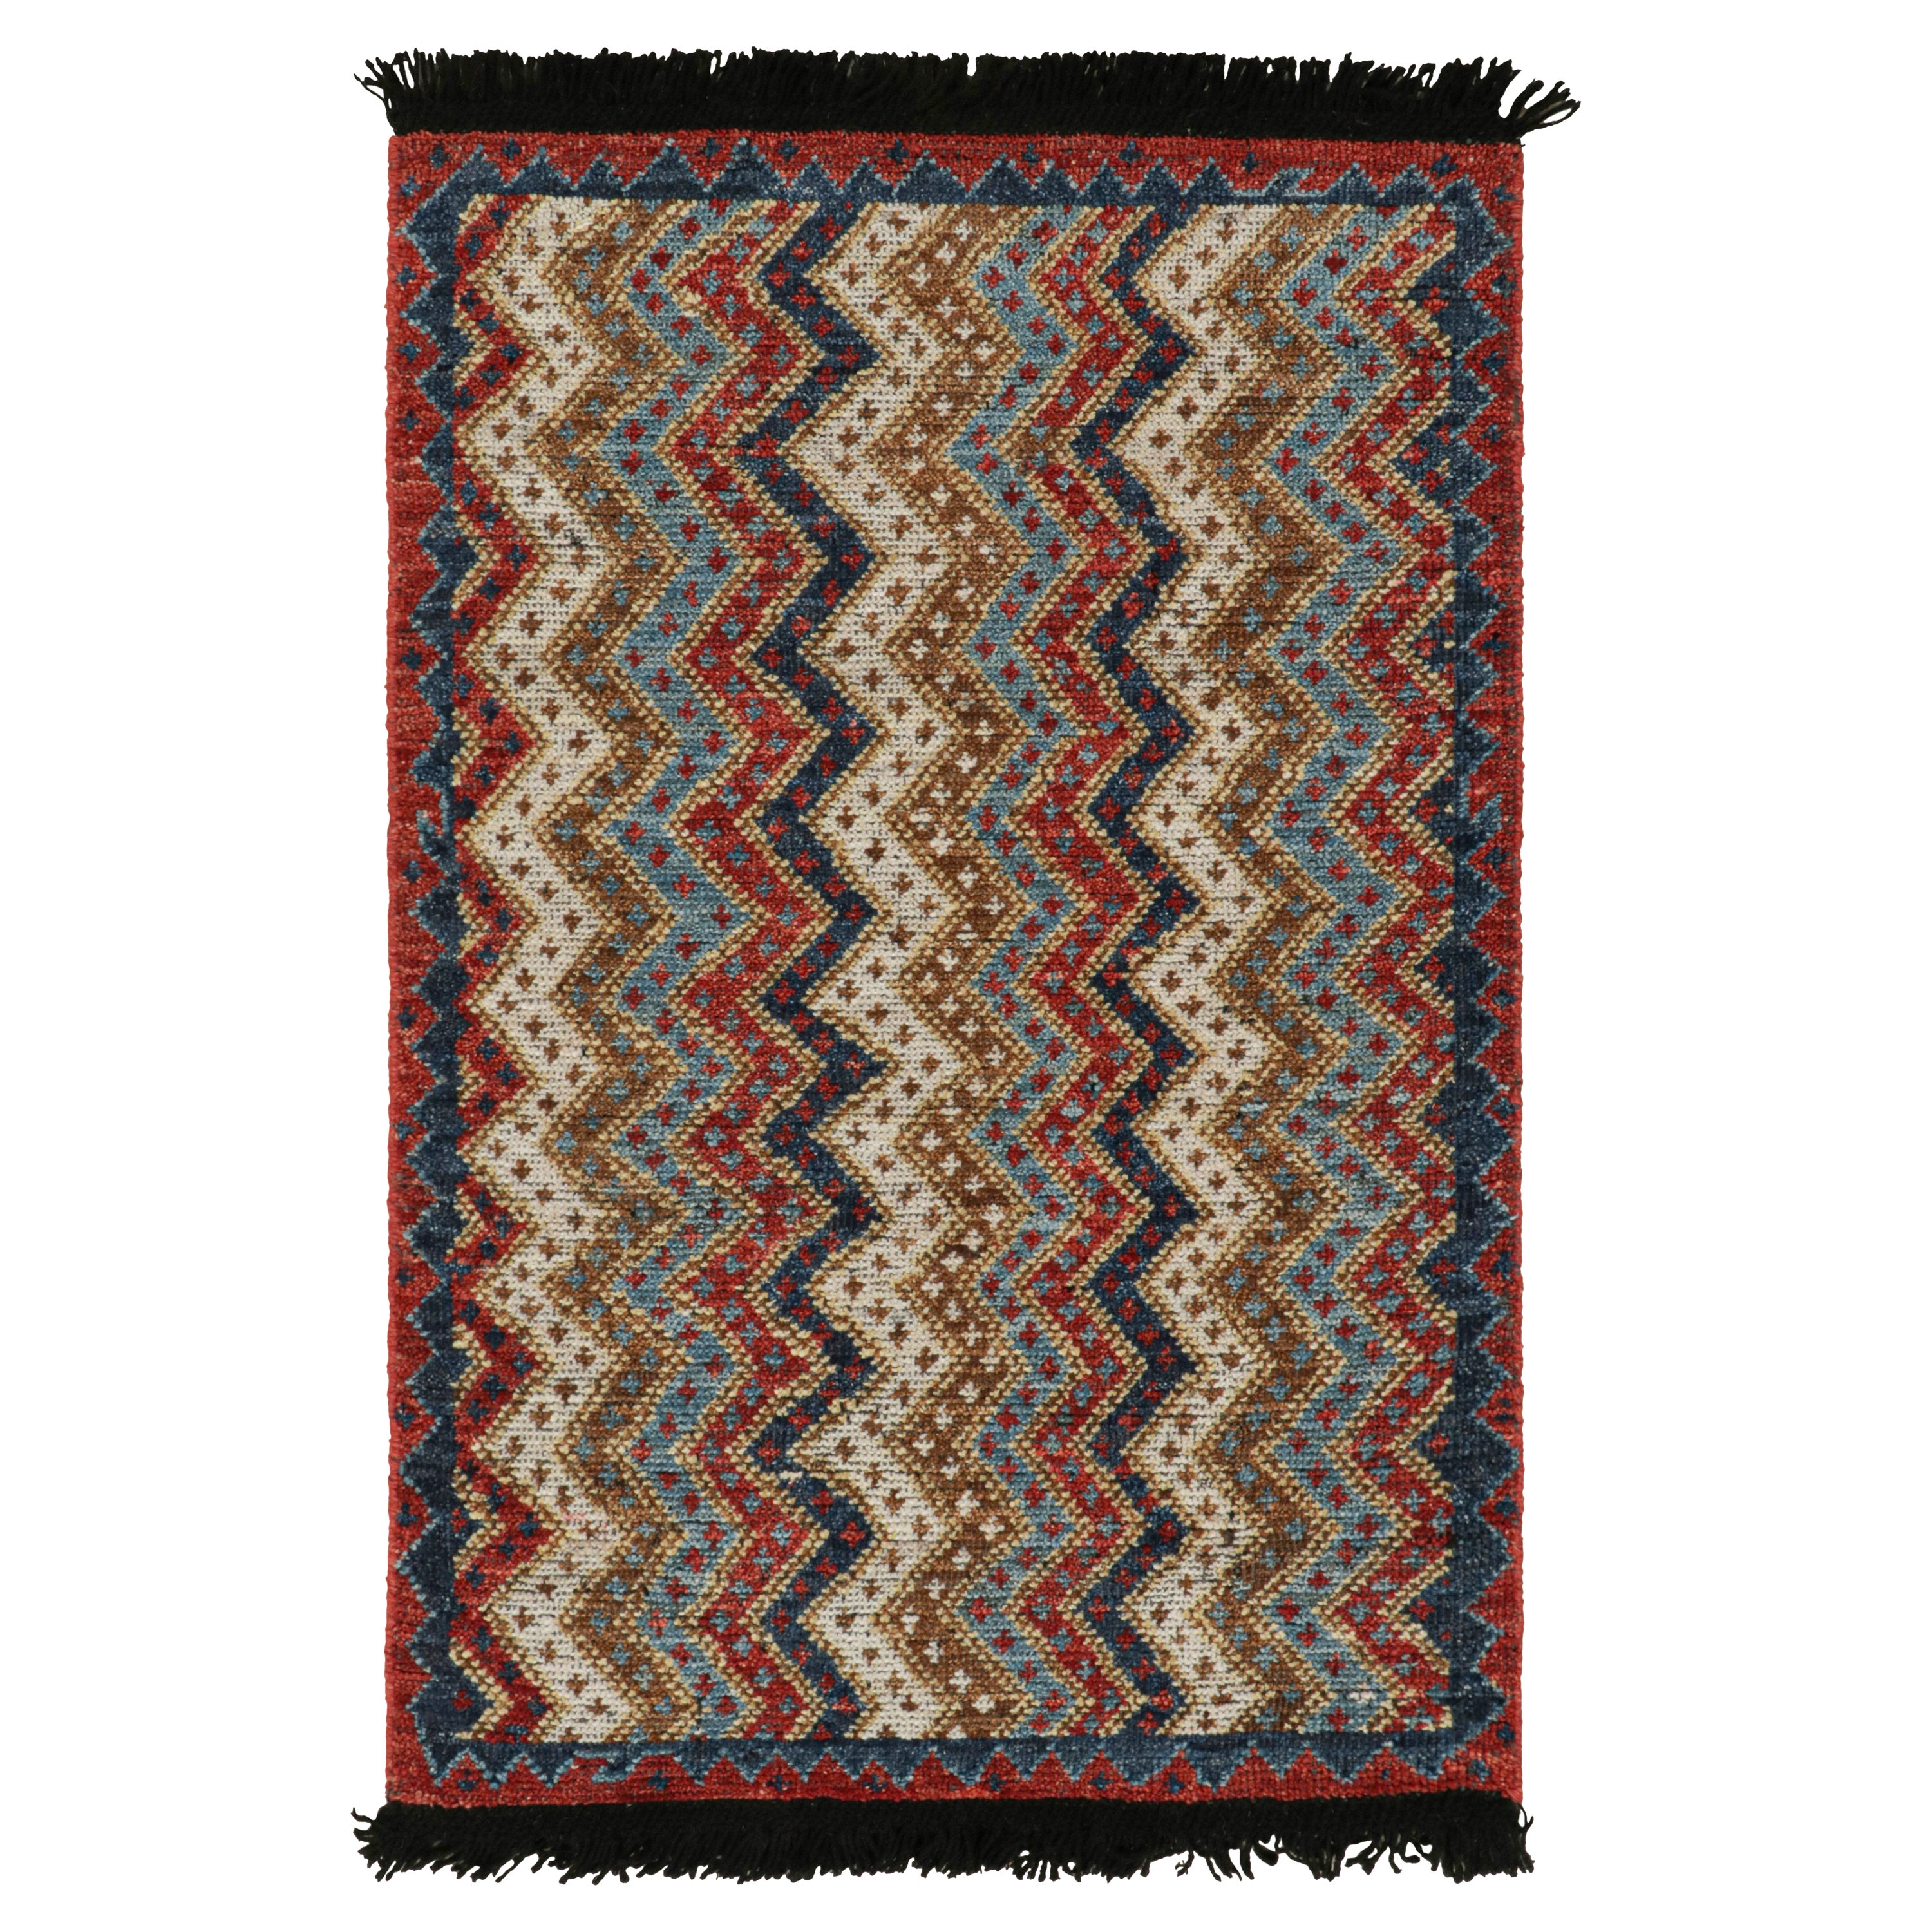 Rug & Kilim’s Antique Tribal Style Rug in Red, Blue and Beige-Brown Chevrons For Sale